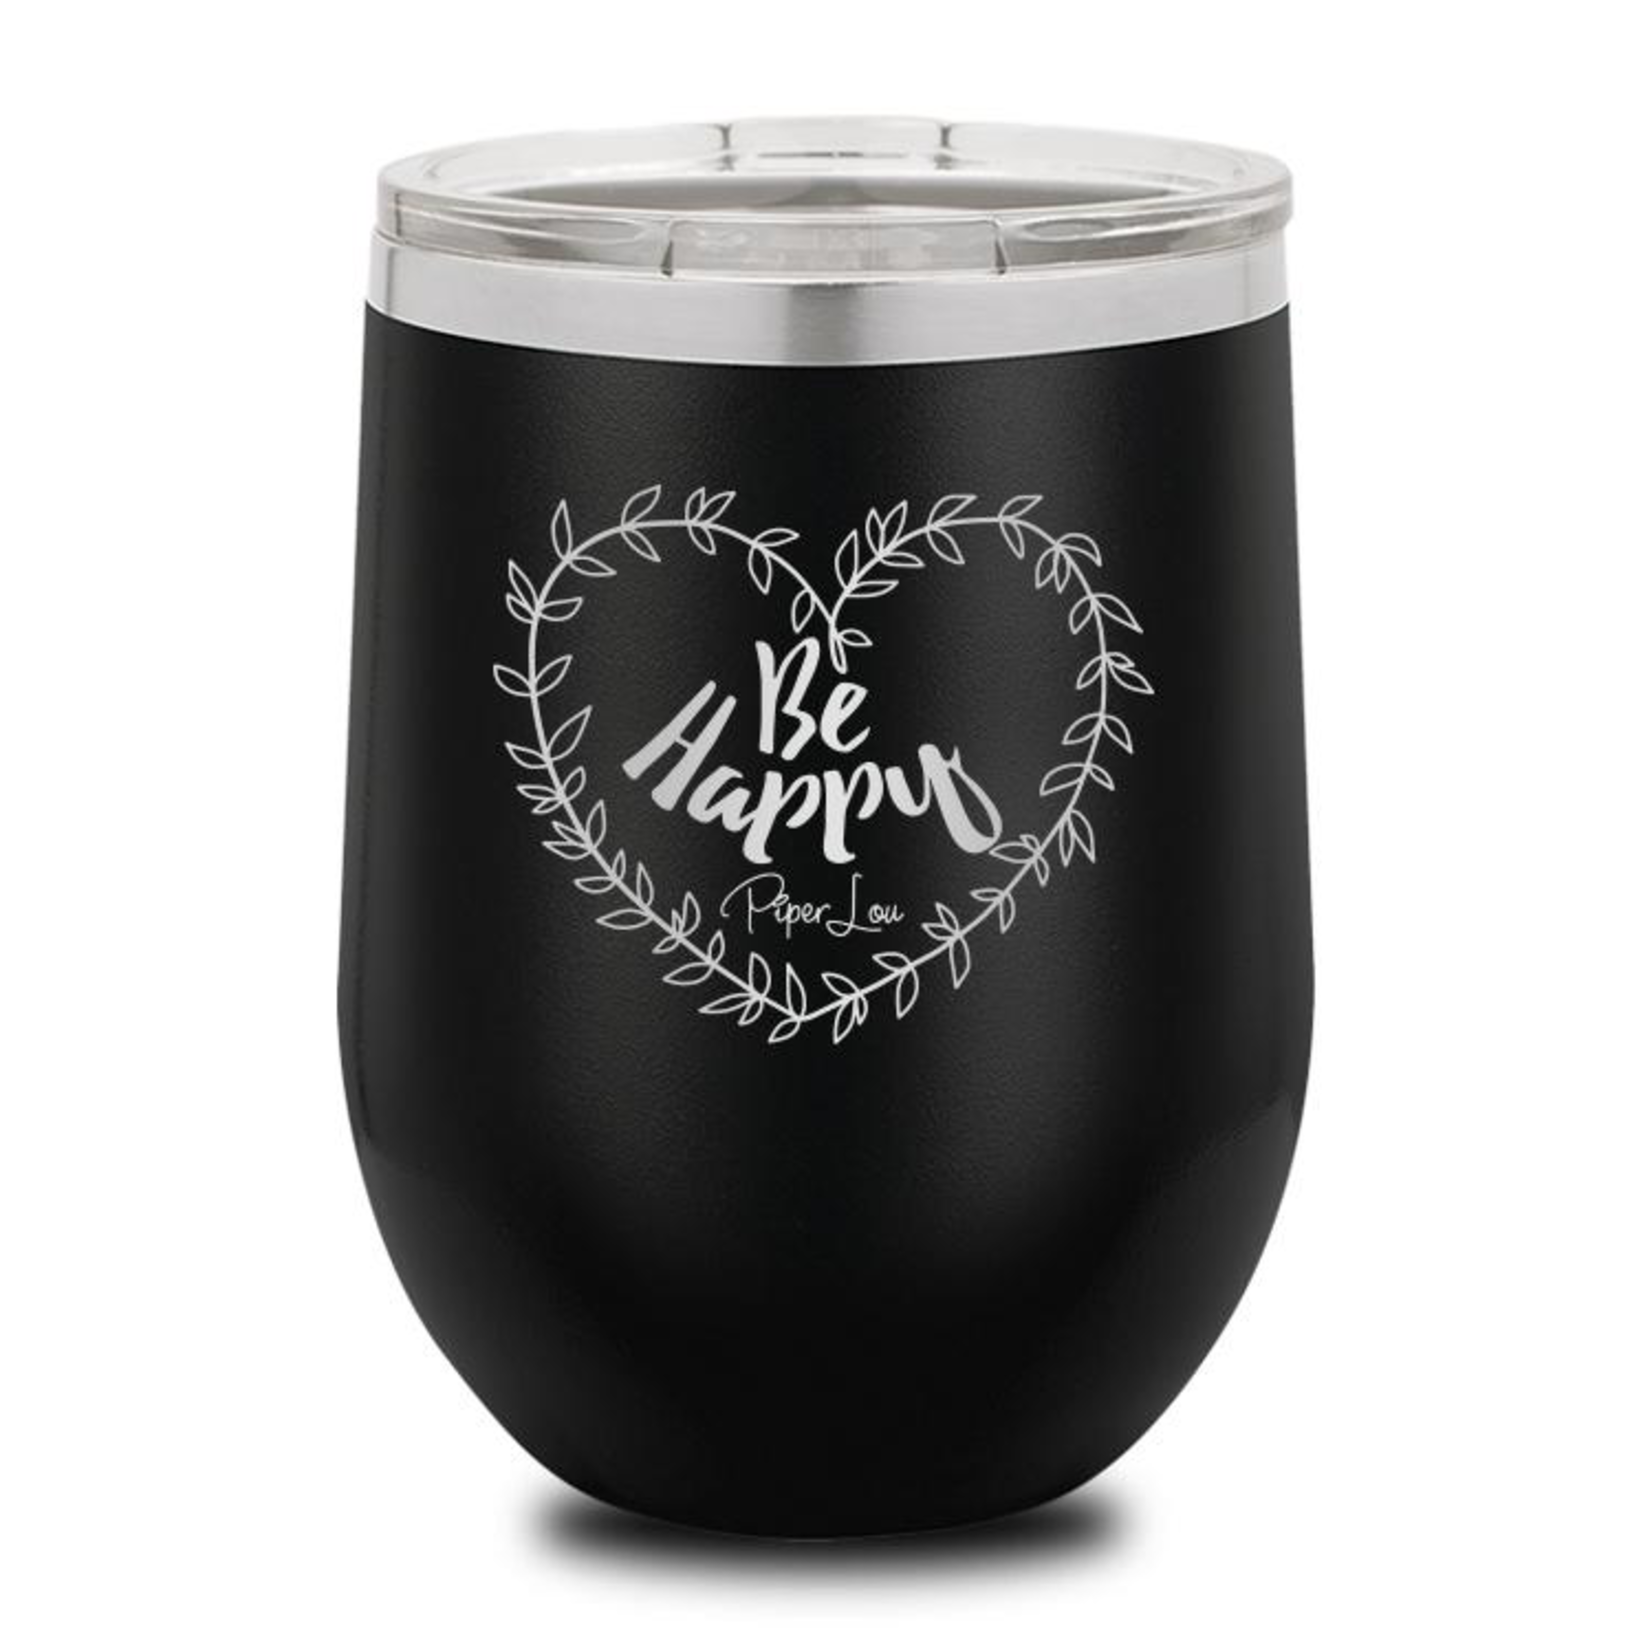 Piper Lou Be Happy Wine Cup, sale item, was $29.99